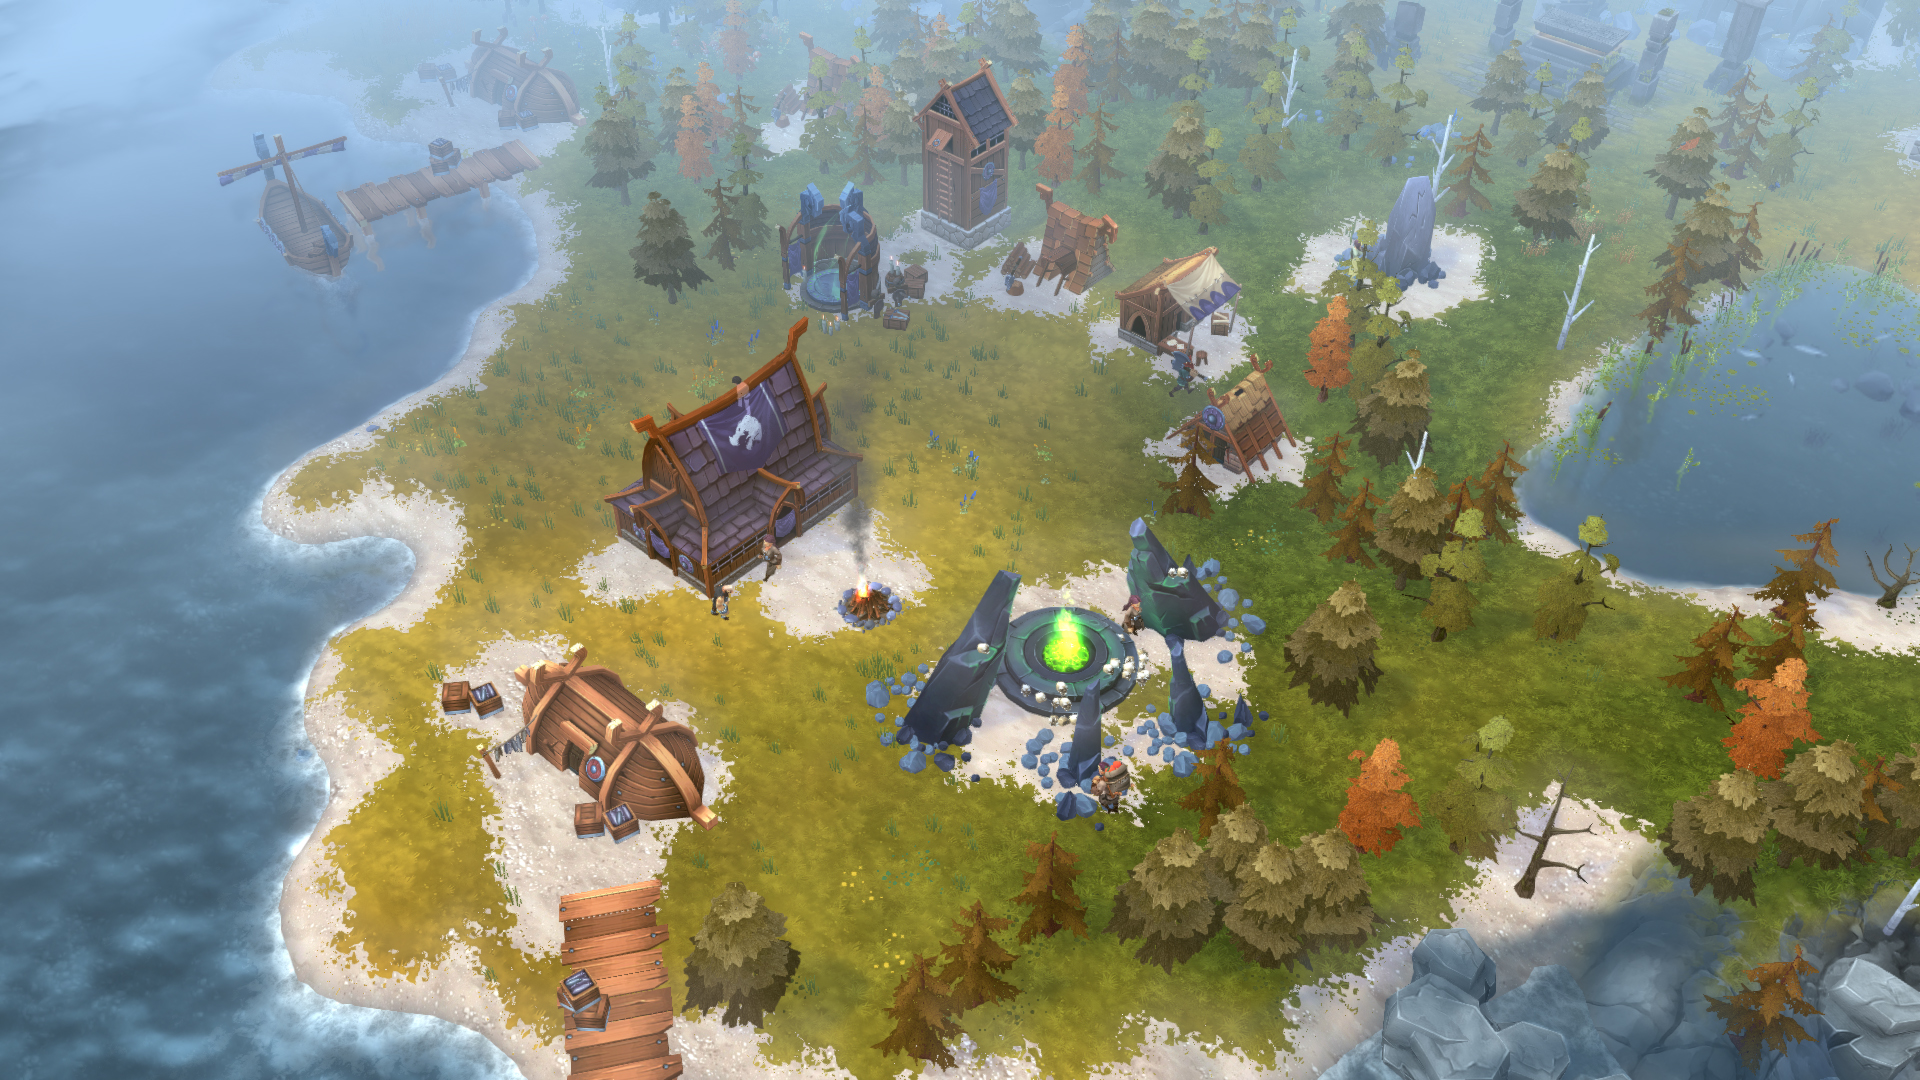 Northgard - nidhogg clan of the dragon download free download